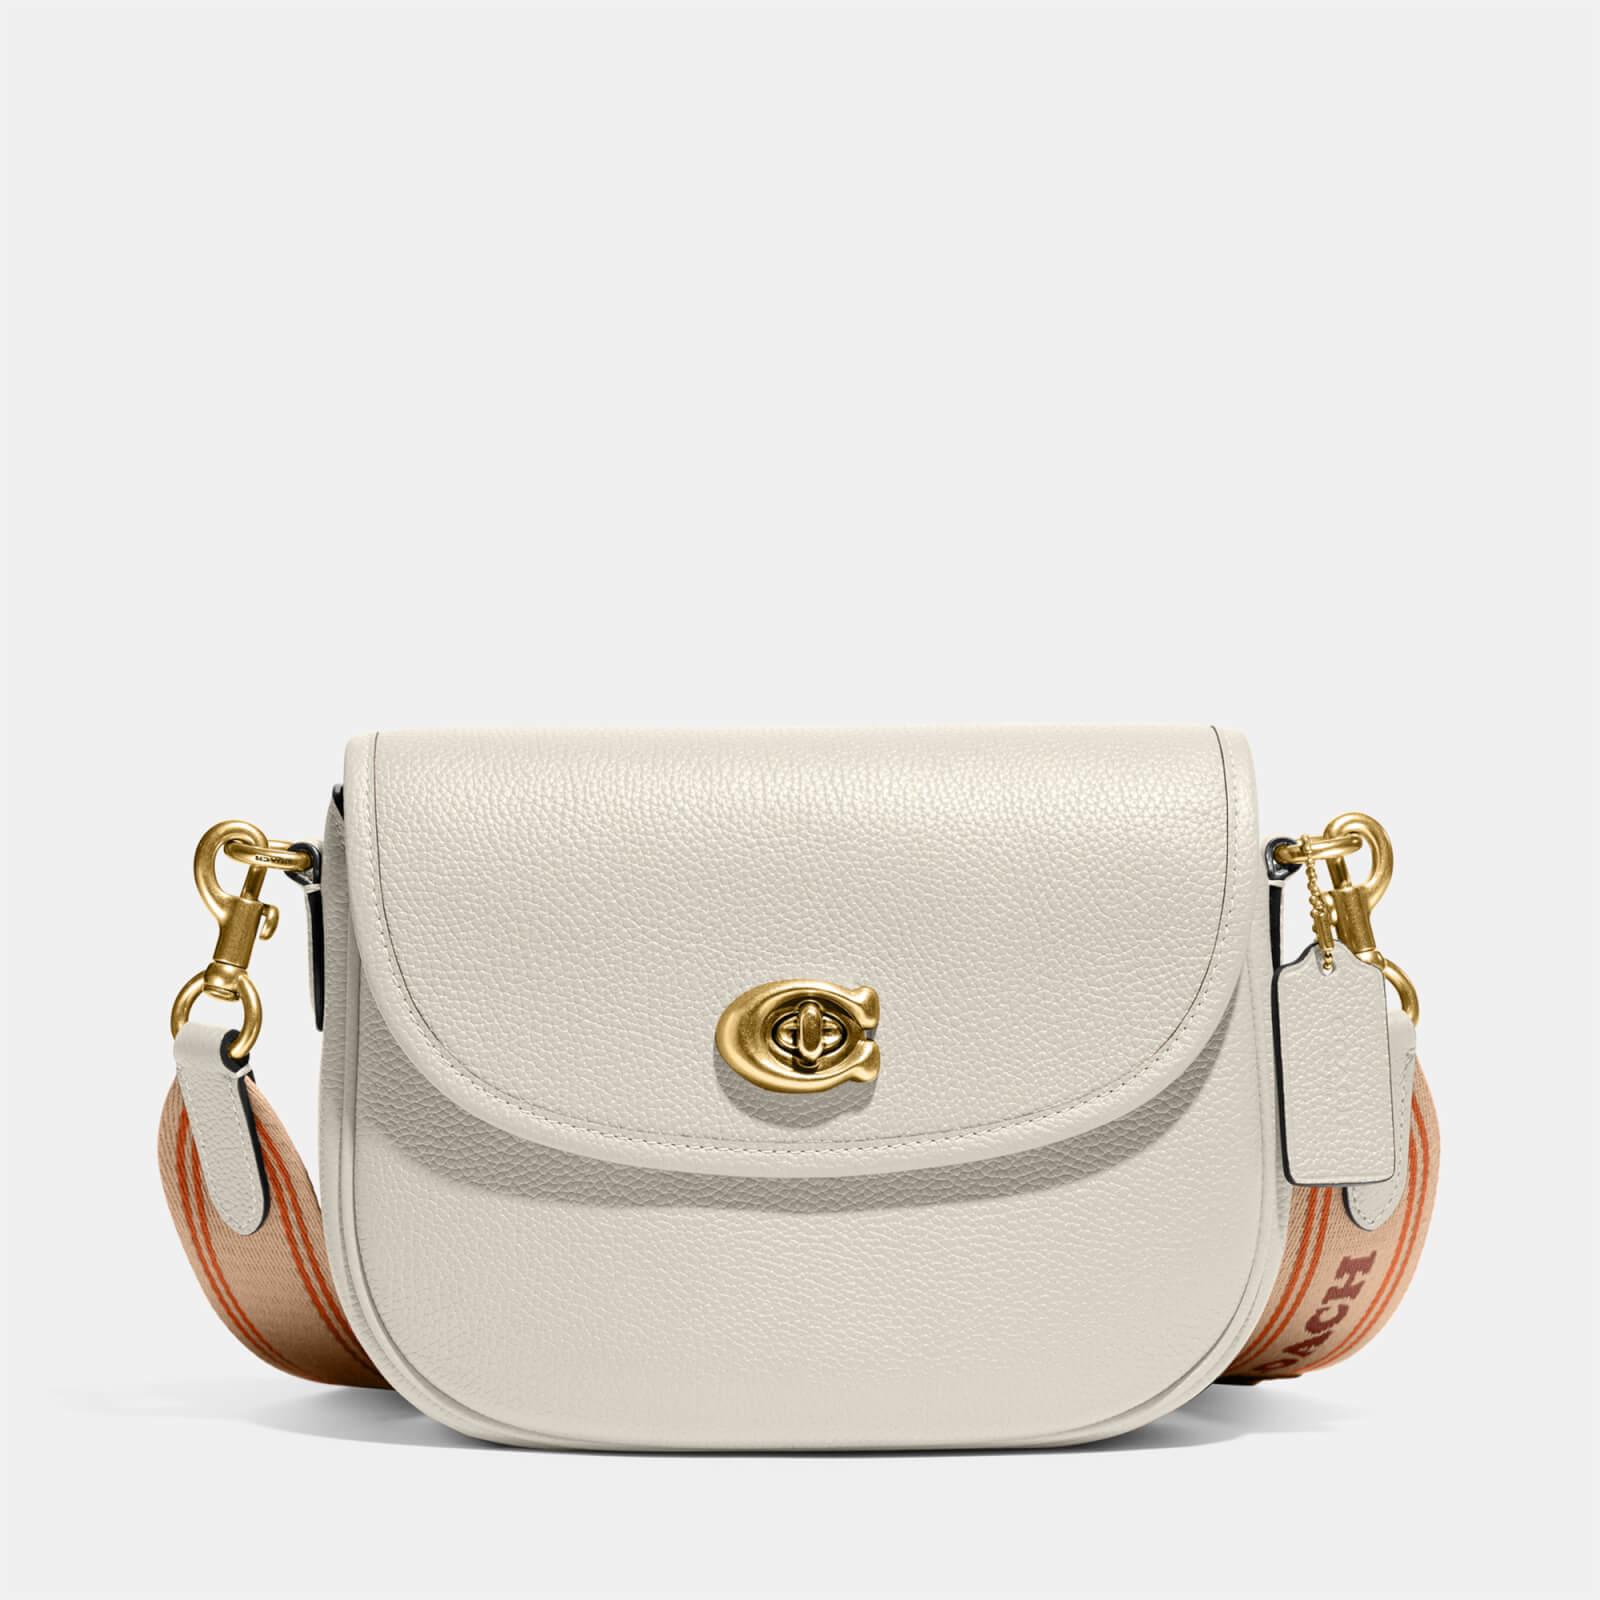 COACH Willow Pebble Leather Shoulder Bag